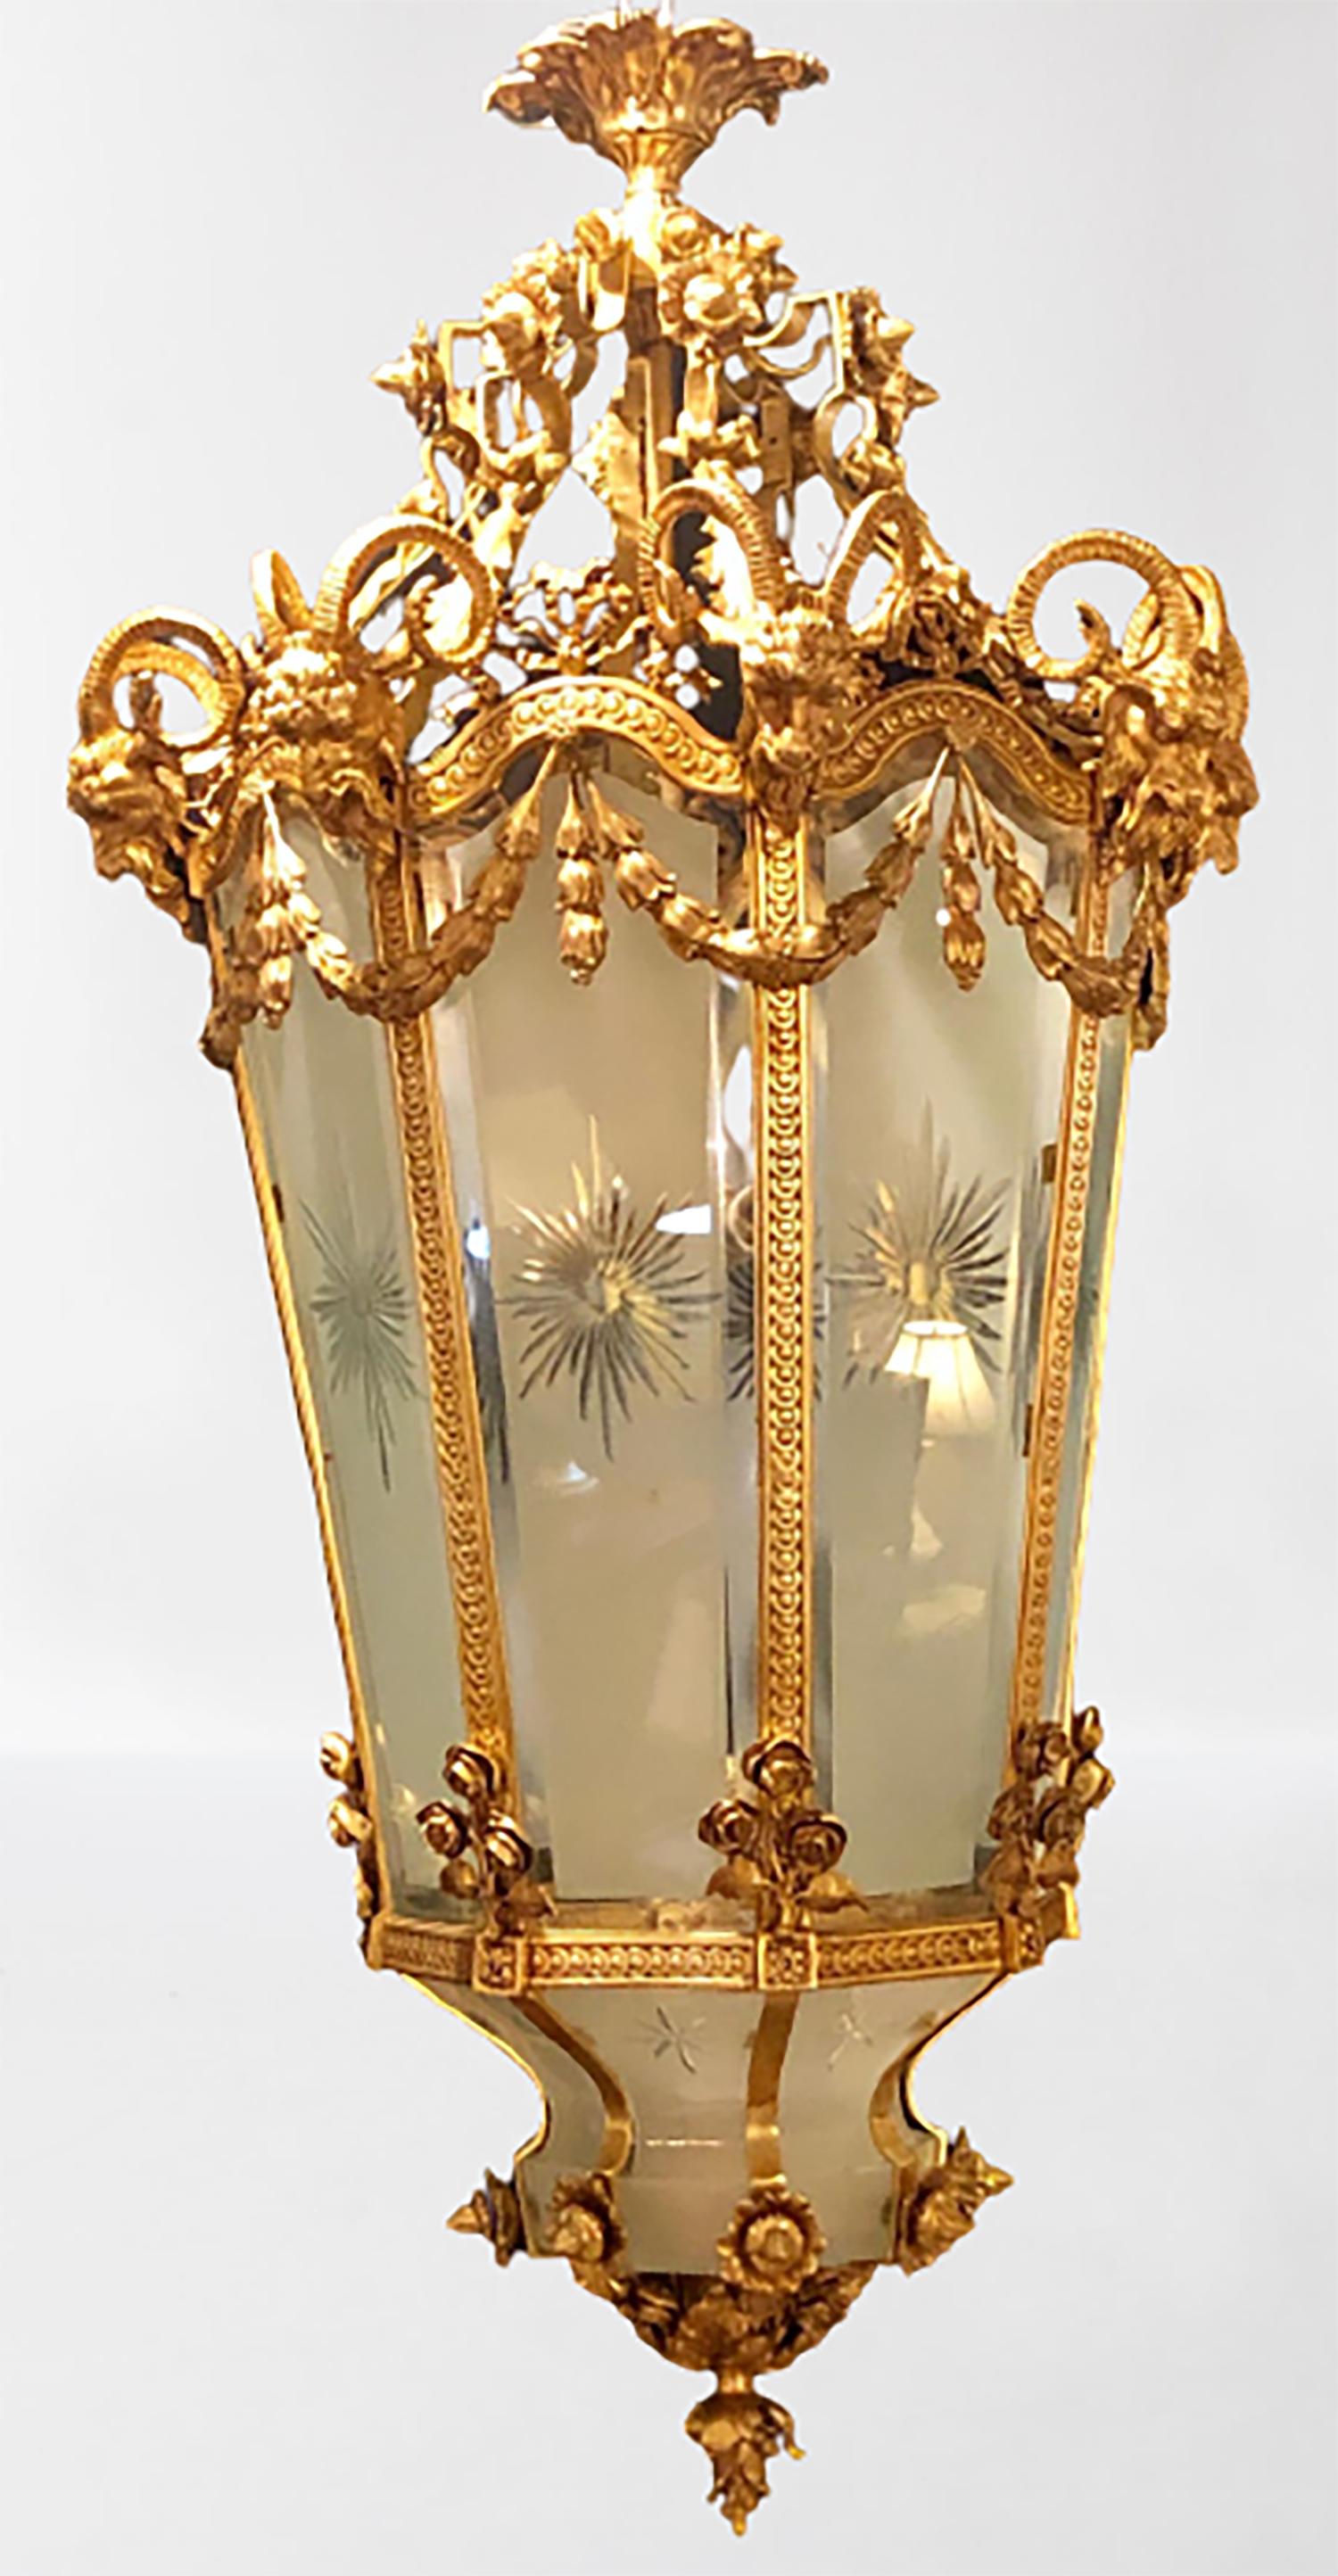 A Louis XVI style monumental Dore bronze rams head etched glass lantern. This spectacular one of a kind lantern is simply too stunning to behold. The frosted and etched star burst curved panels of glass framed in a heavy thick gilt gold bronze of